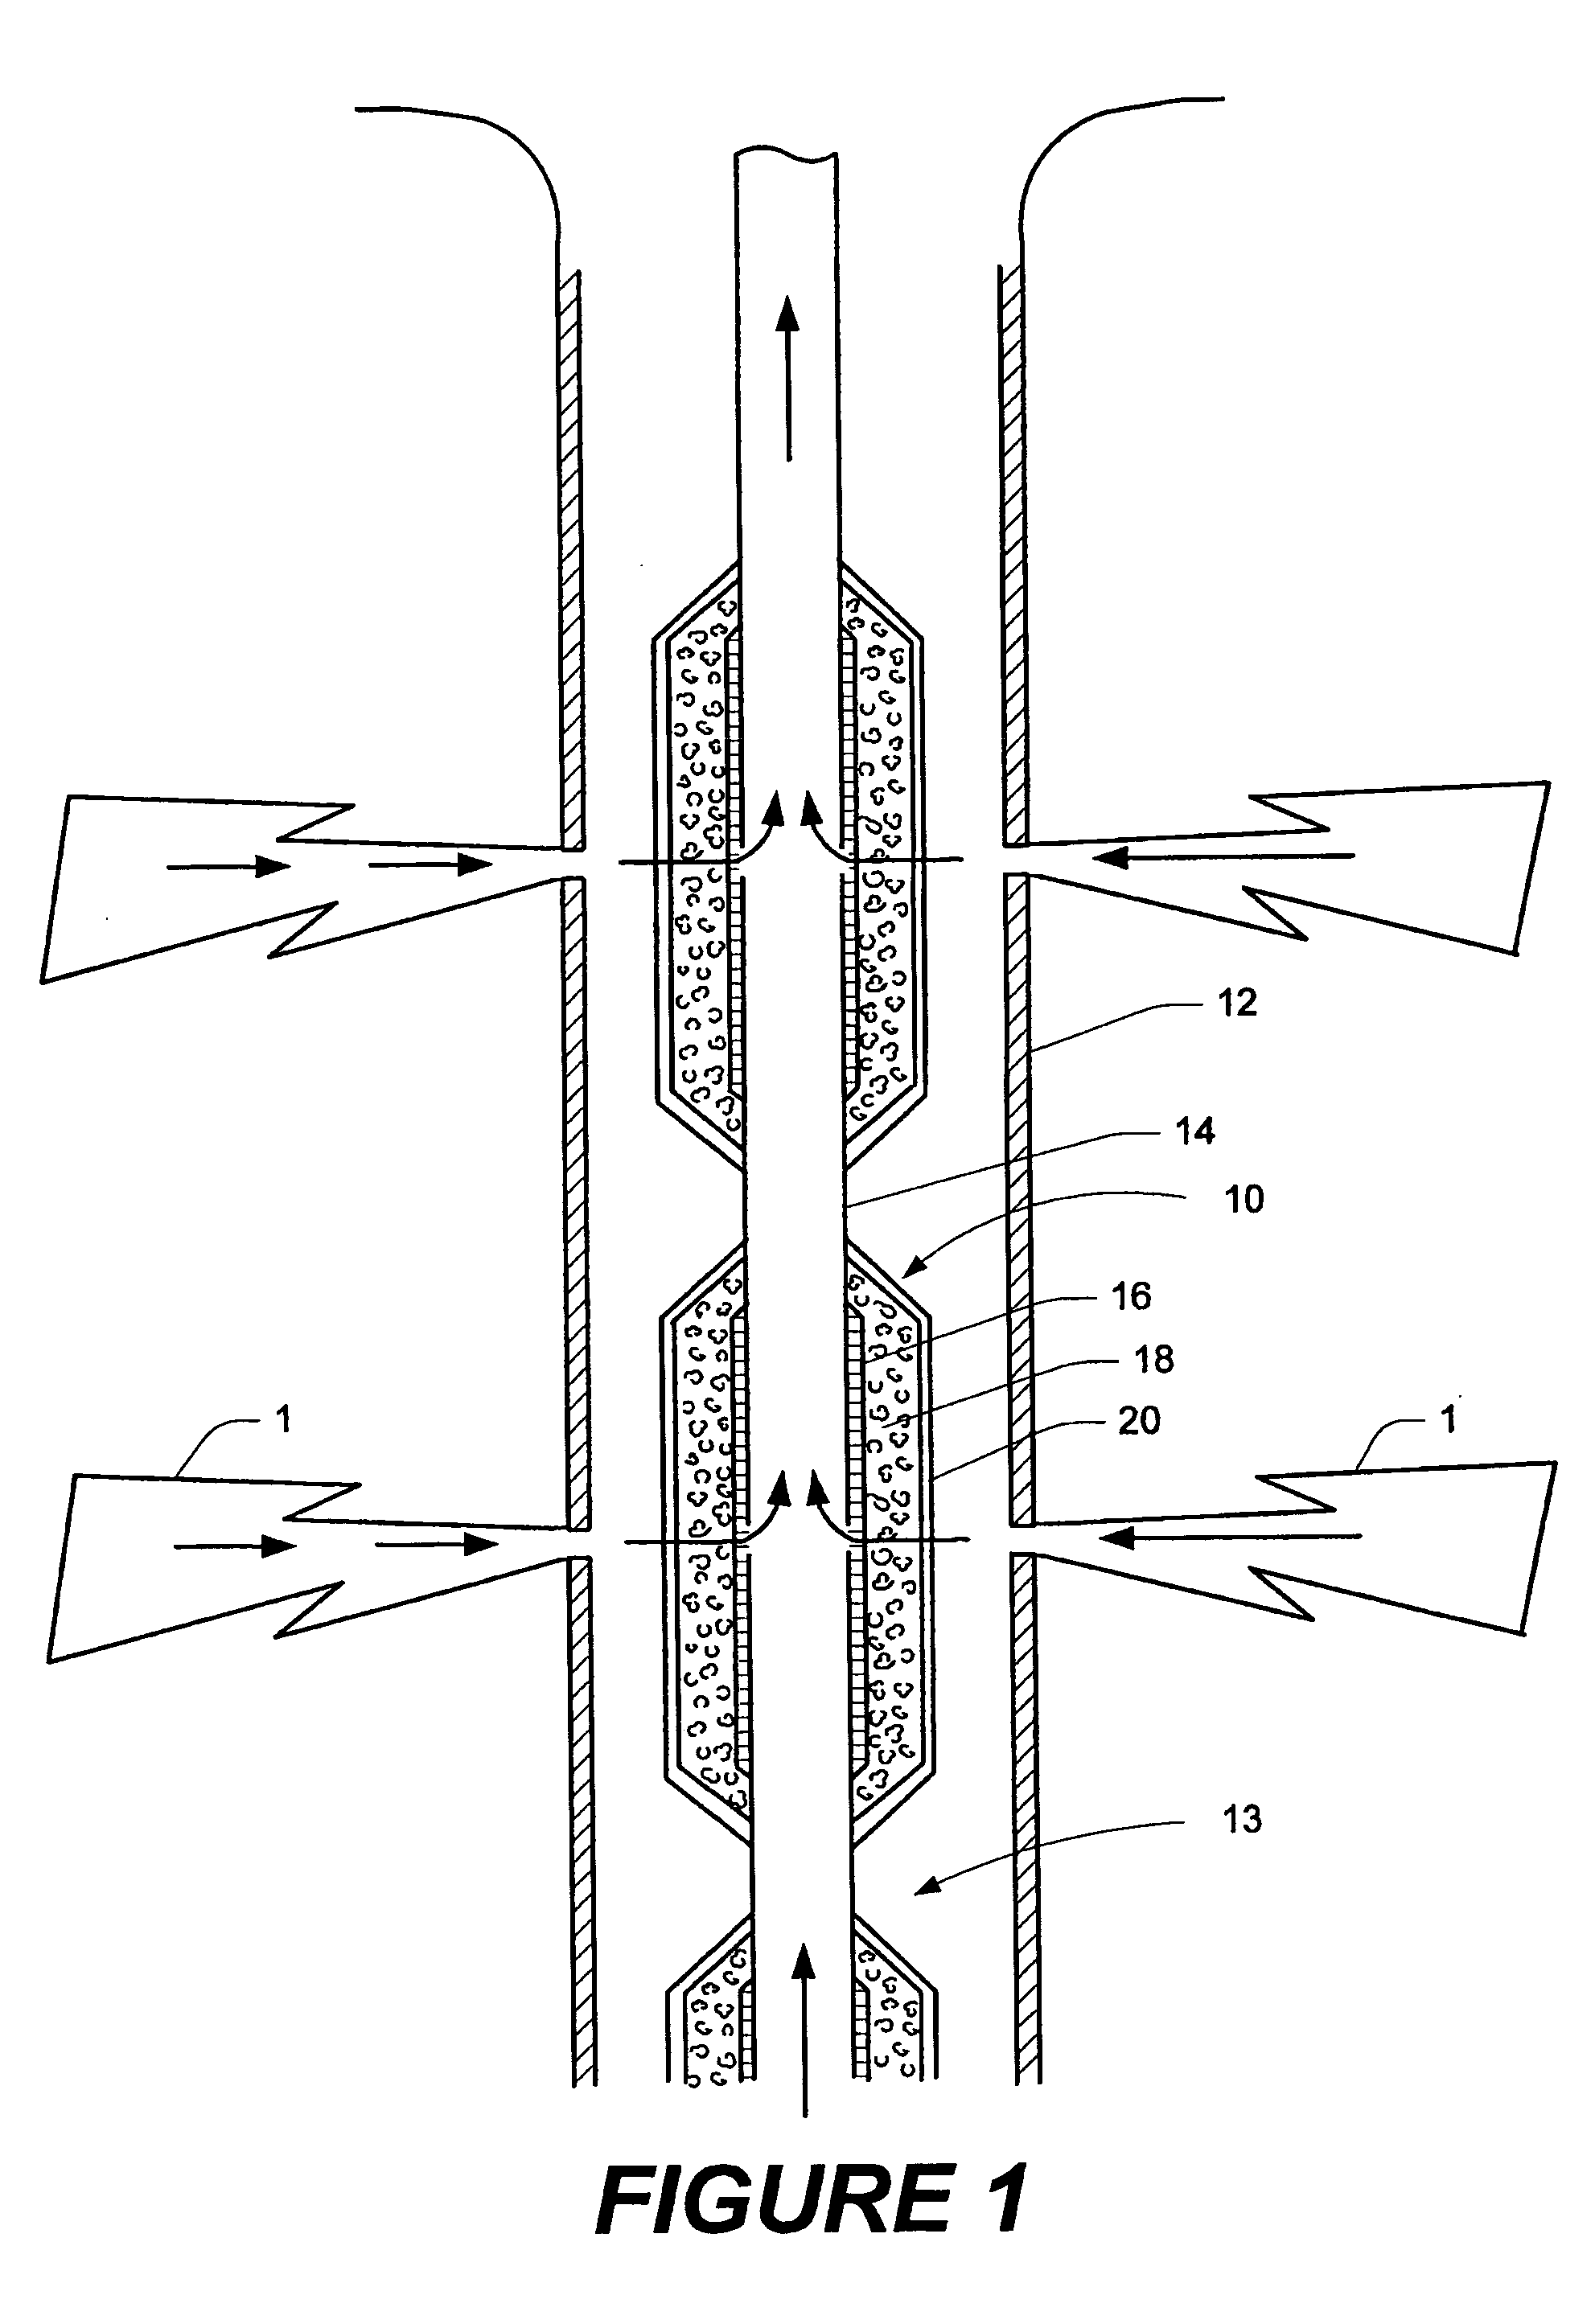 Method and apparatus for temporarily maintaining a downhole foam element in a compressed state